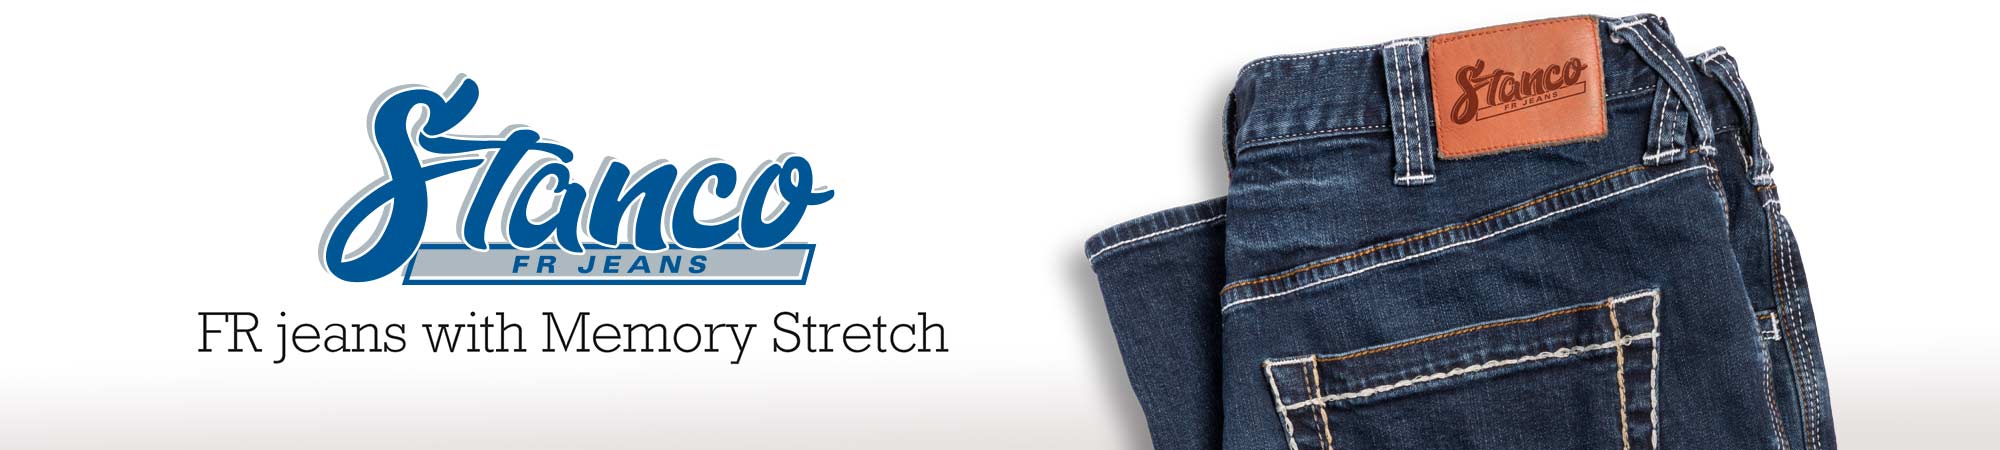 Stanco FR Jeans with Memory Stretch.